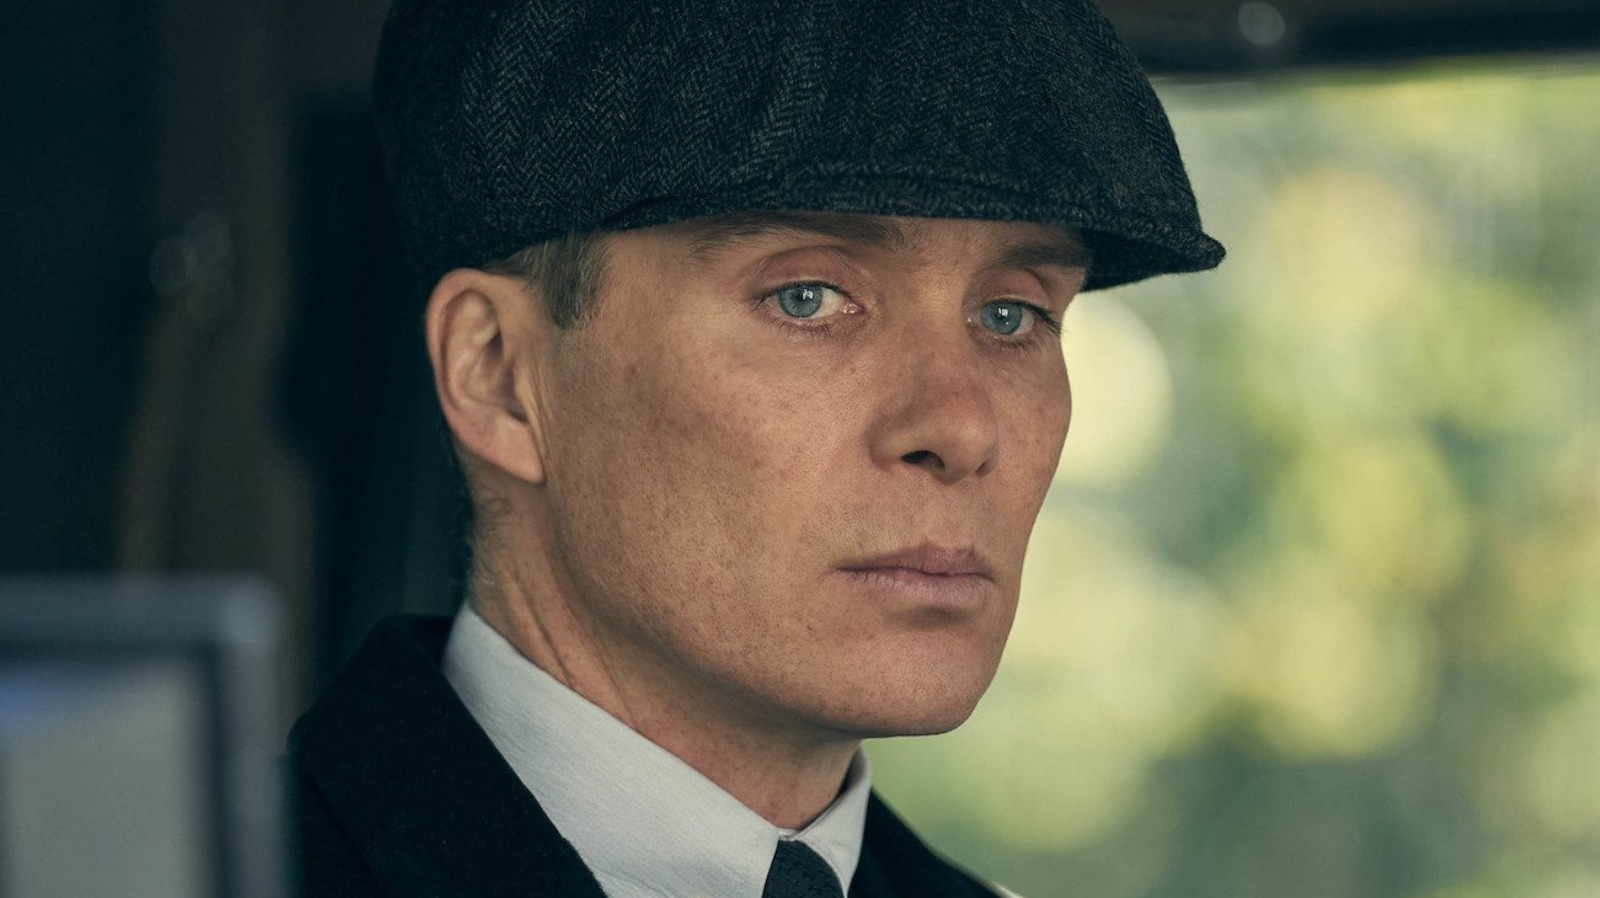 By Order of the Peaky Blinders: The Official Companion to the Hit TV Series